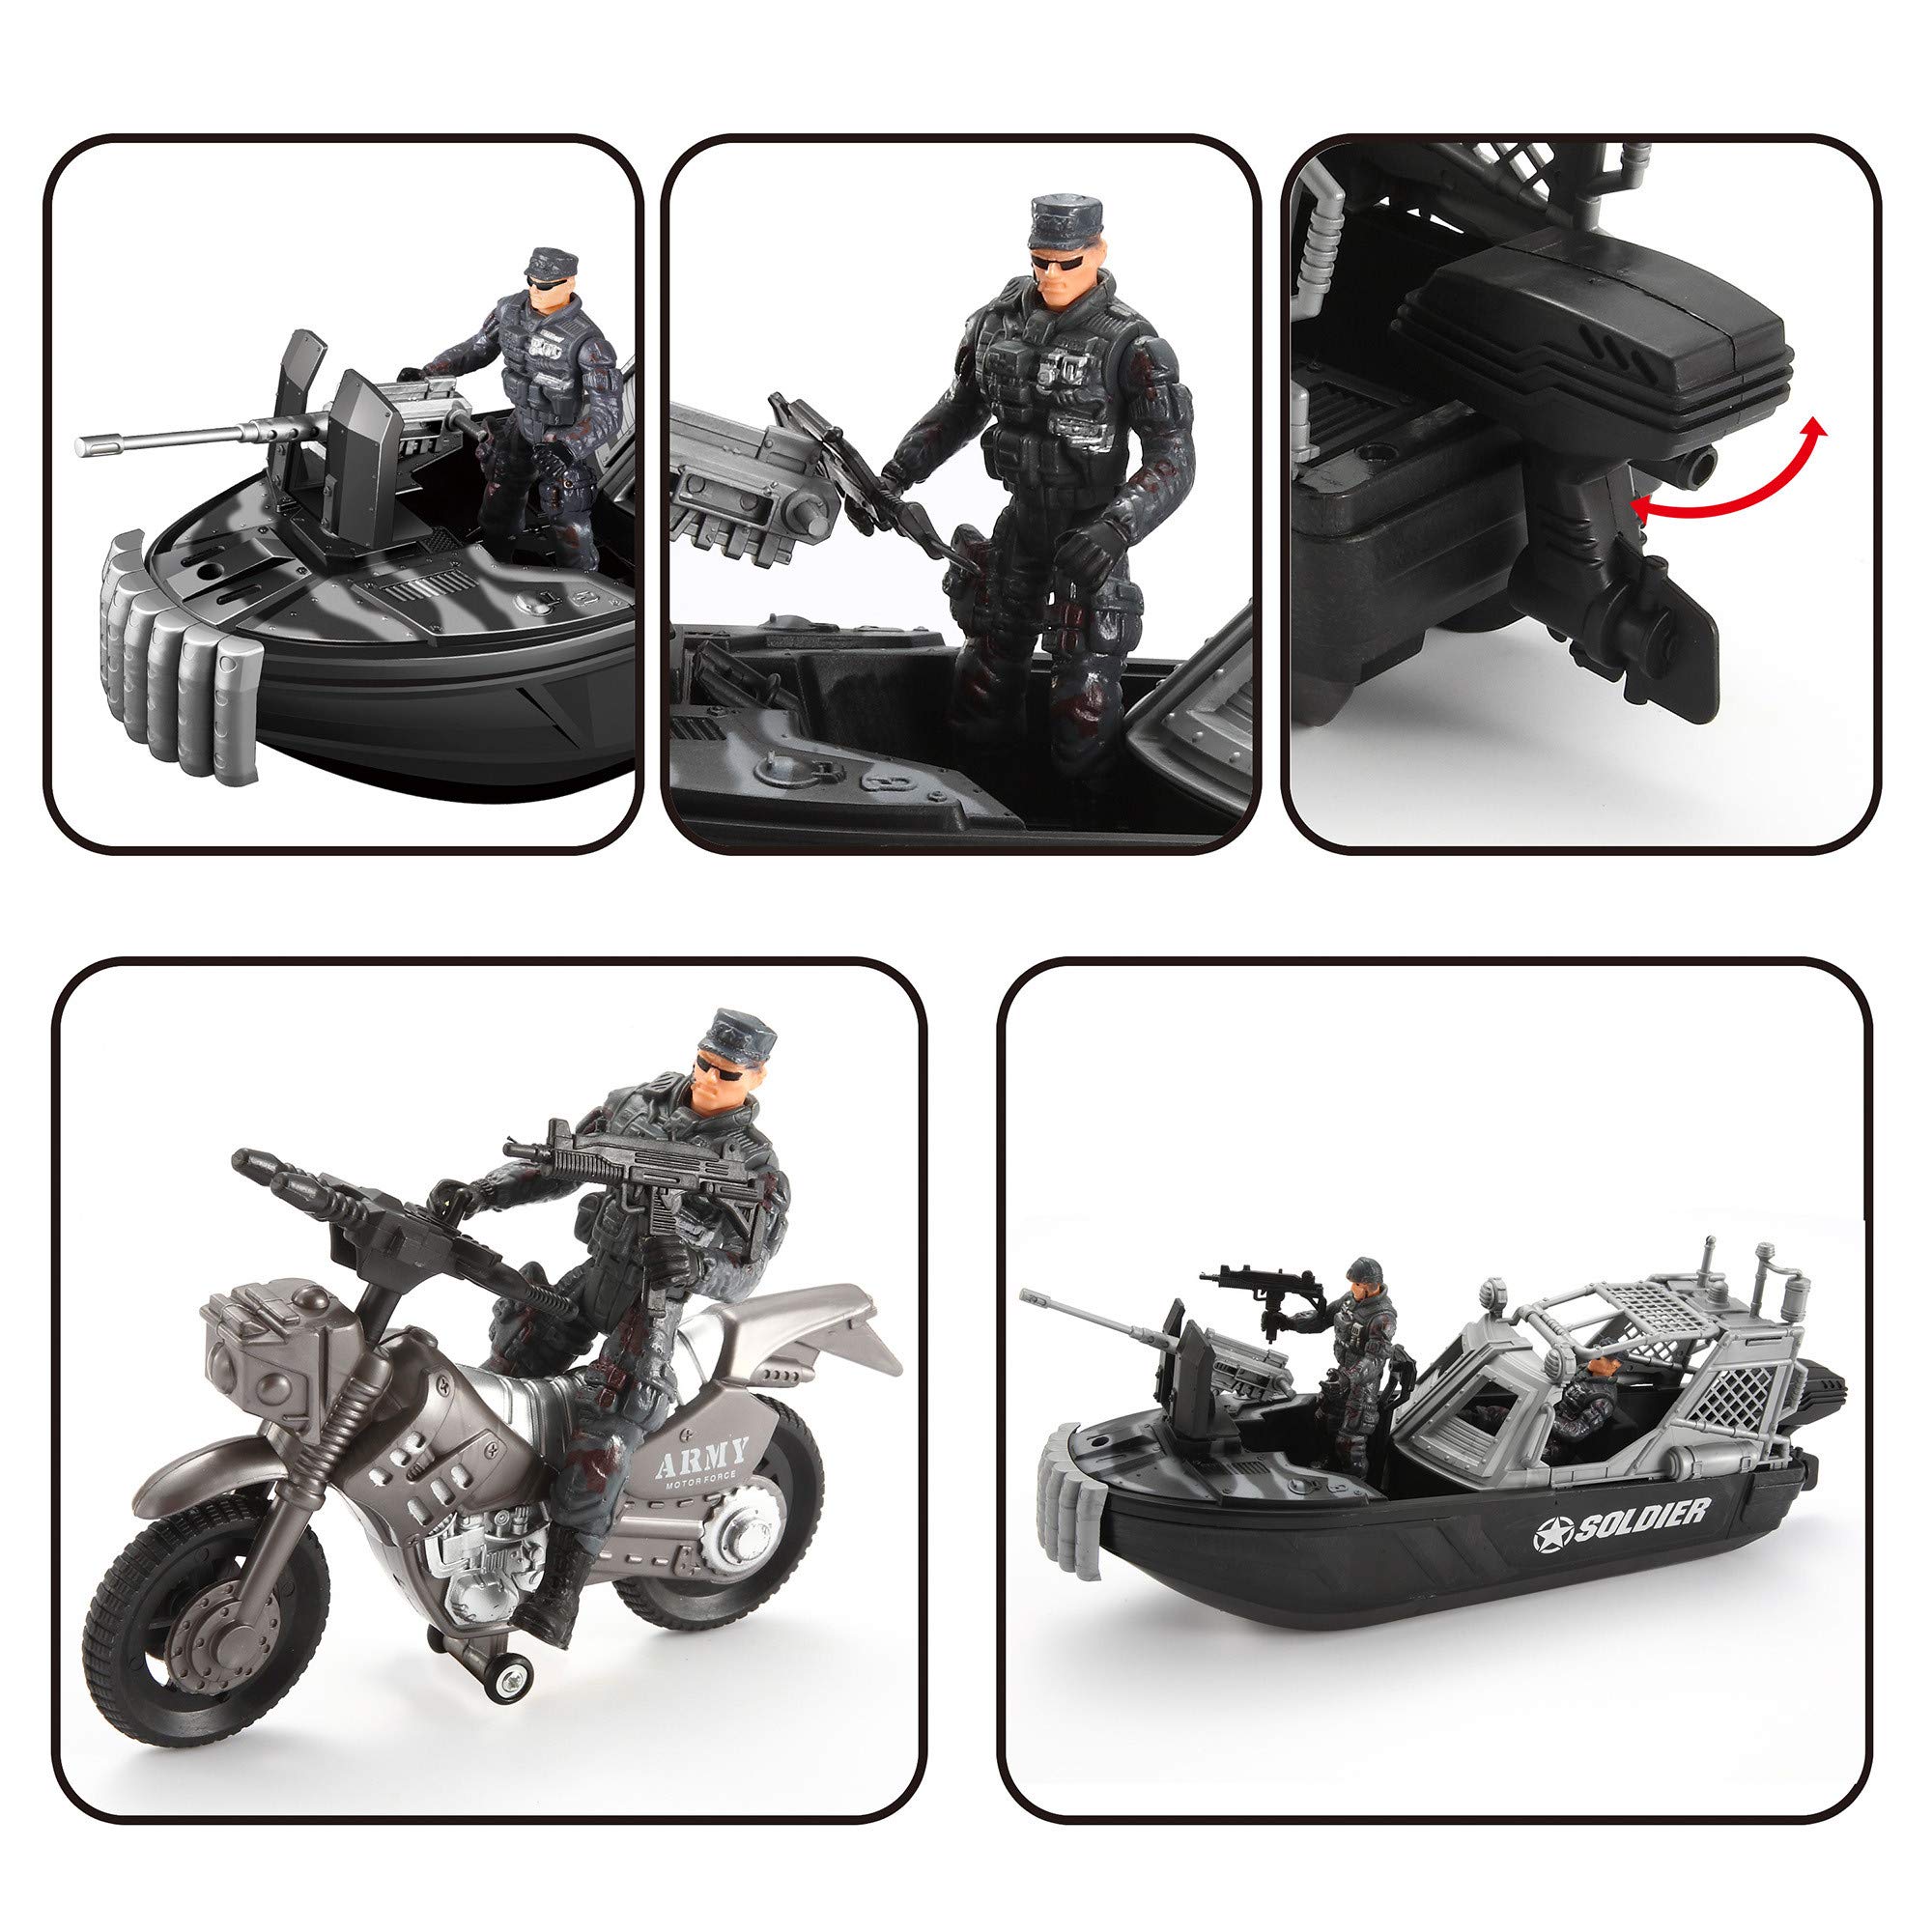 JOYIN 9 Pcs Combat Boat and Military Vehicle Toys Set with Realistic Military Combat Boat, Mini Helicopter, Motorcycle, Army Men Toy Soldiers Action Figures and Other Equipment Accessories